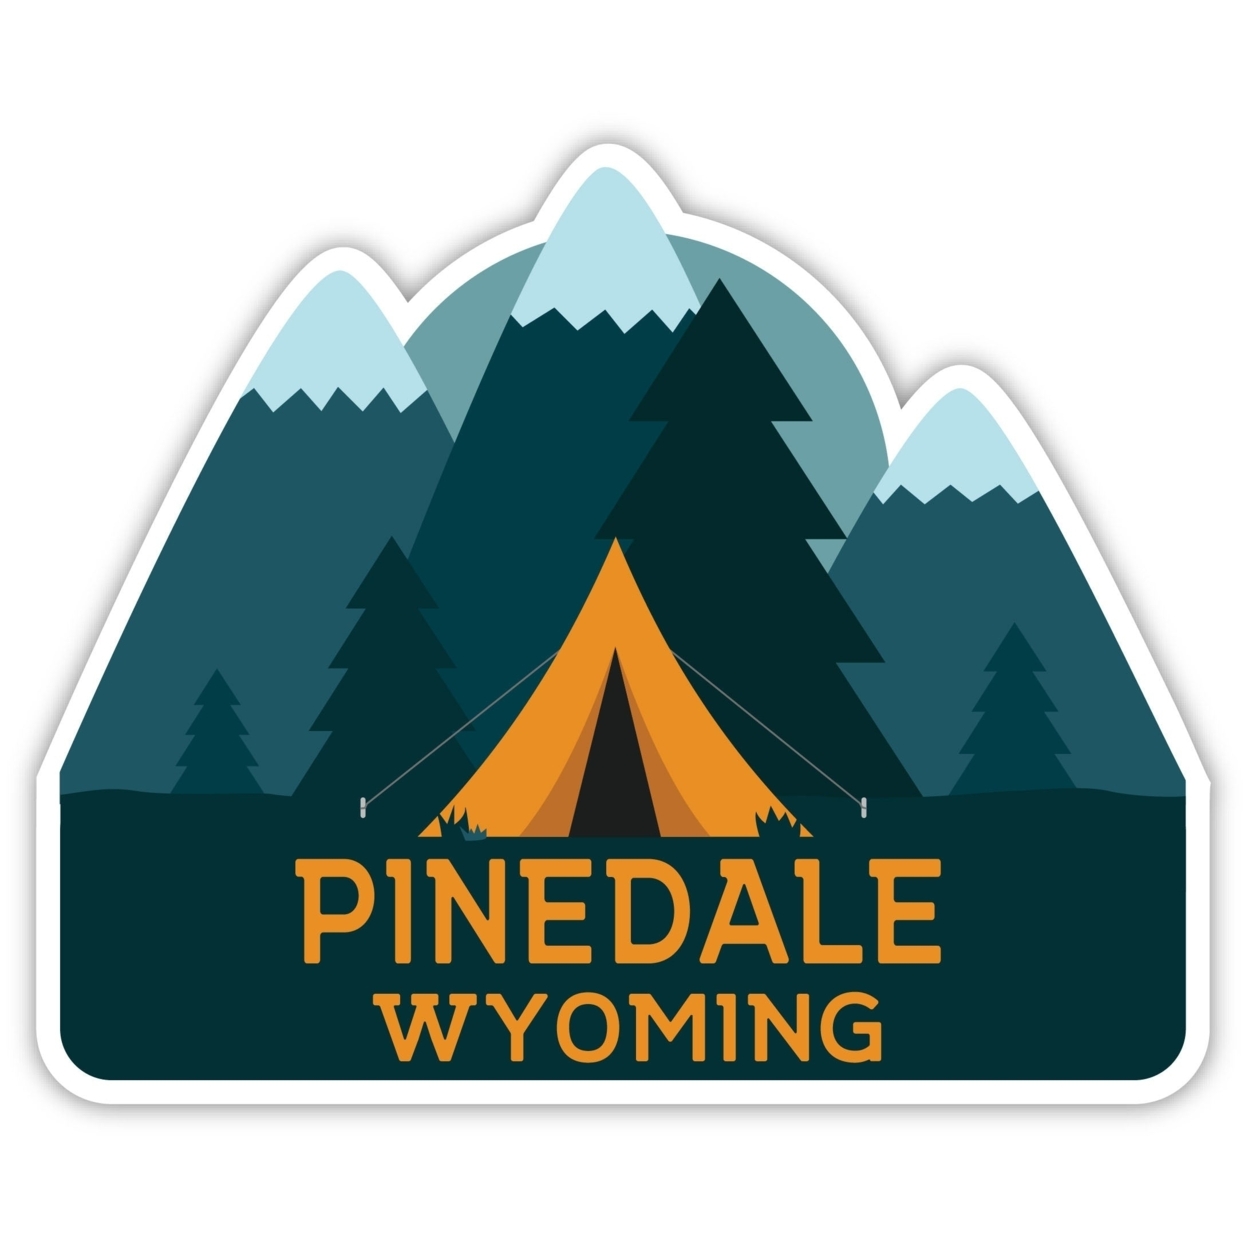 Pinedale Wyoming Souvenir Decorative Stickers (Choose Theme And Size) - Single Unit, 4-Inch, Great Outdoors